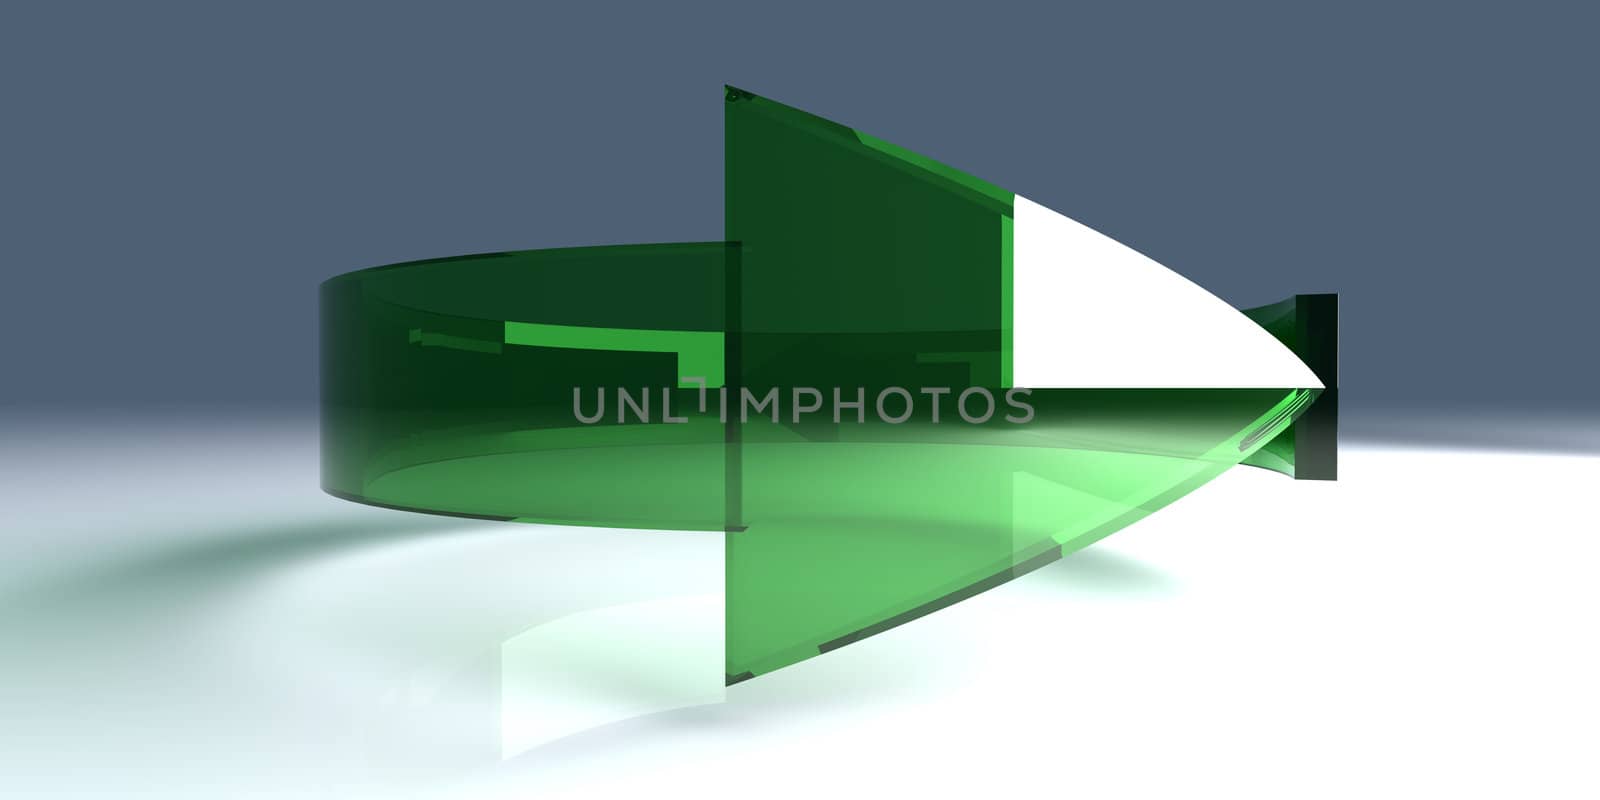 3D rendered Illustration. An arrow symbolizing an repeating process such as recycling (ecological concept) or reload of data.